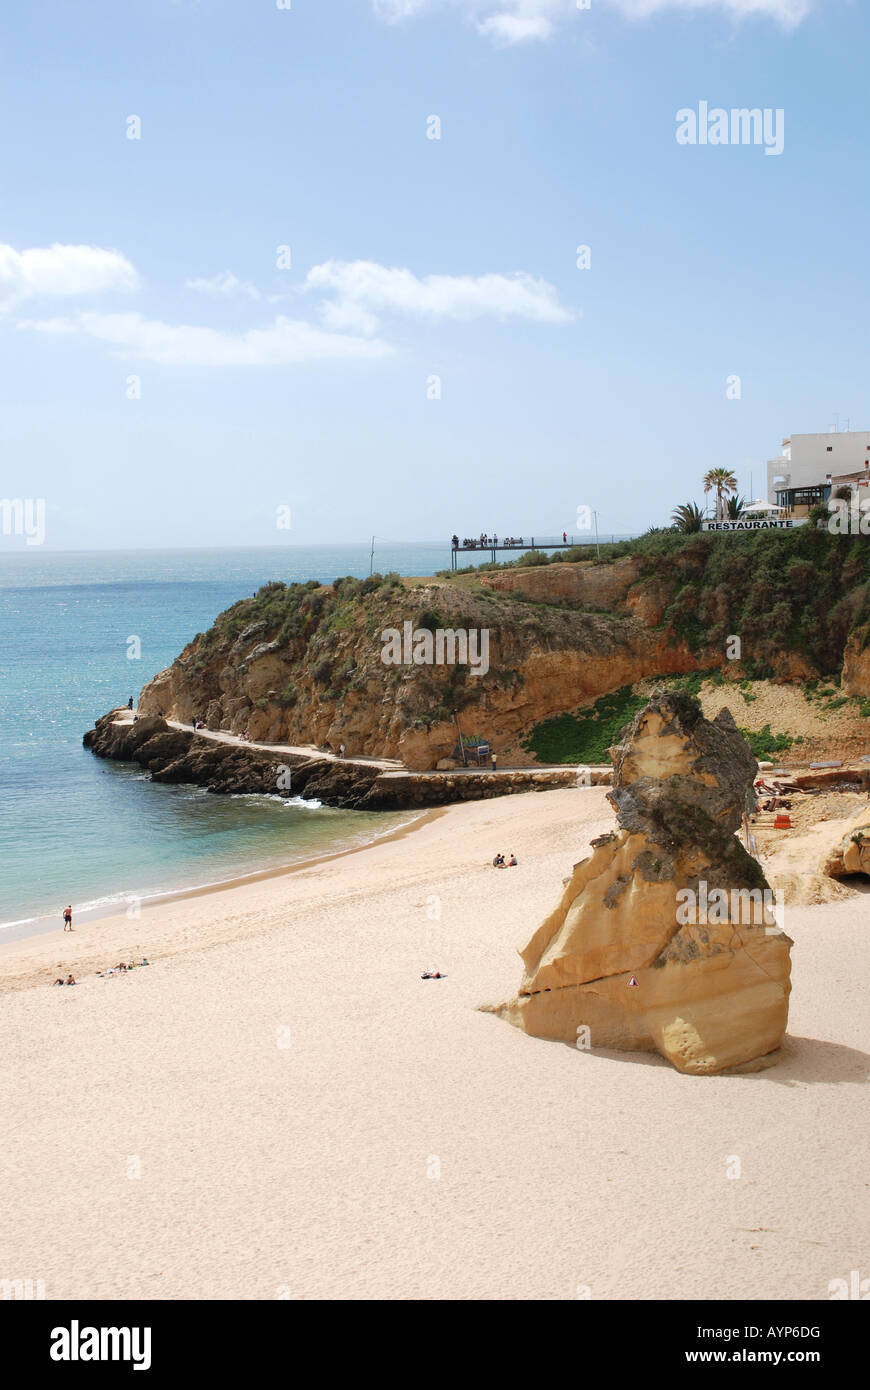 Portugal, Allbufeira town beach and viewpoint Stock Photo